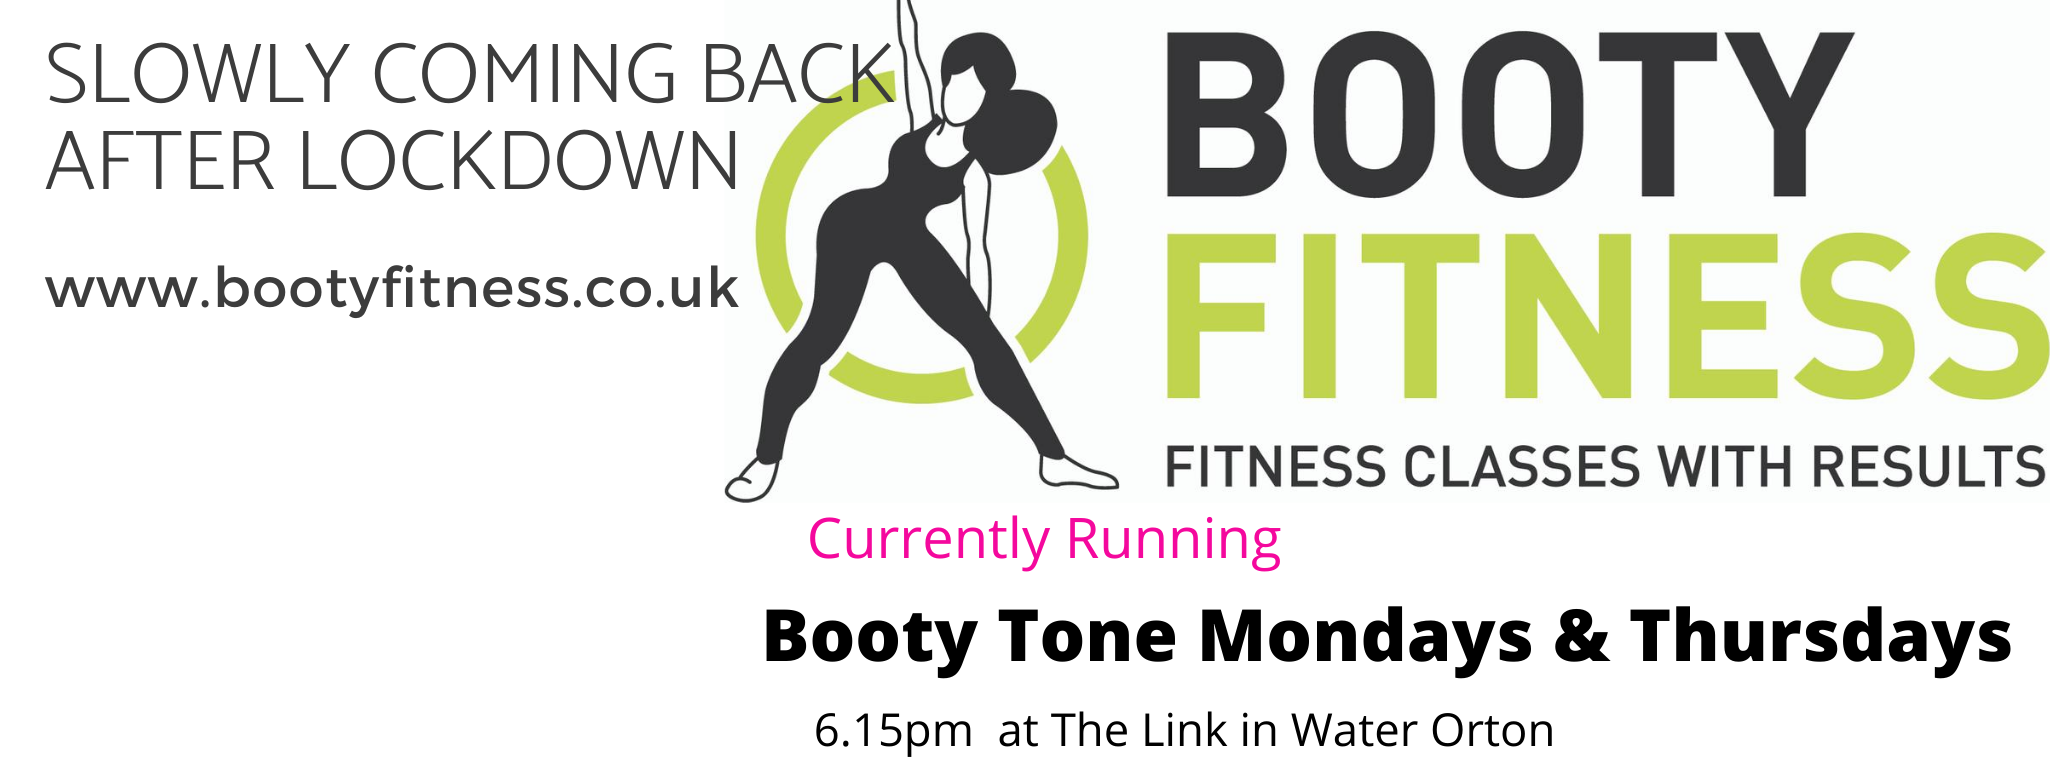 2020 booty fitness timetable fitness classes